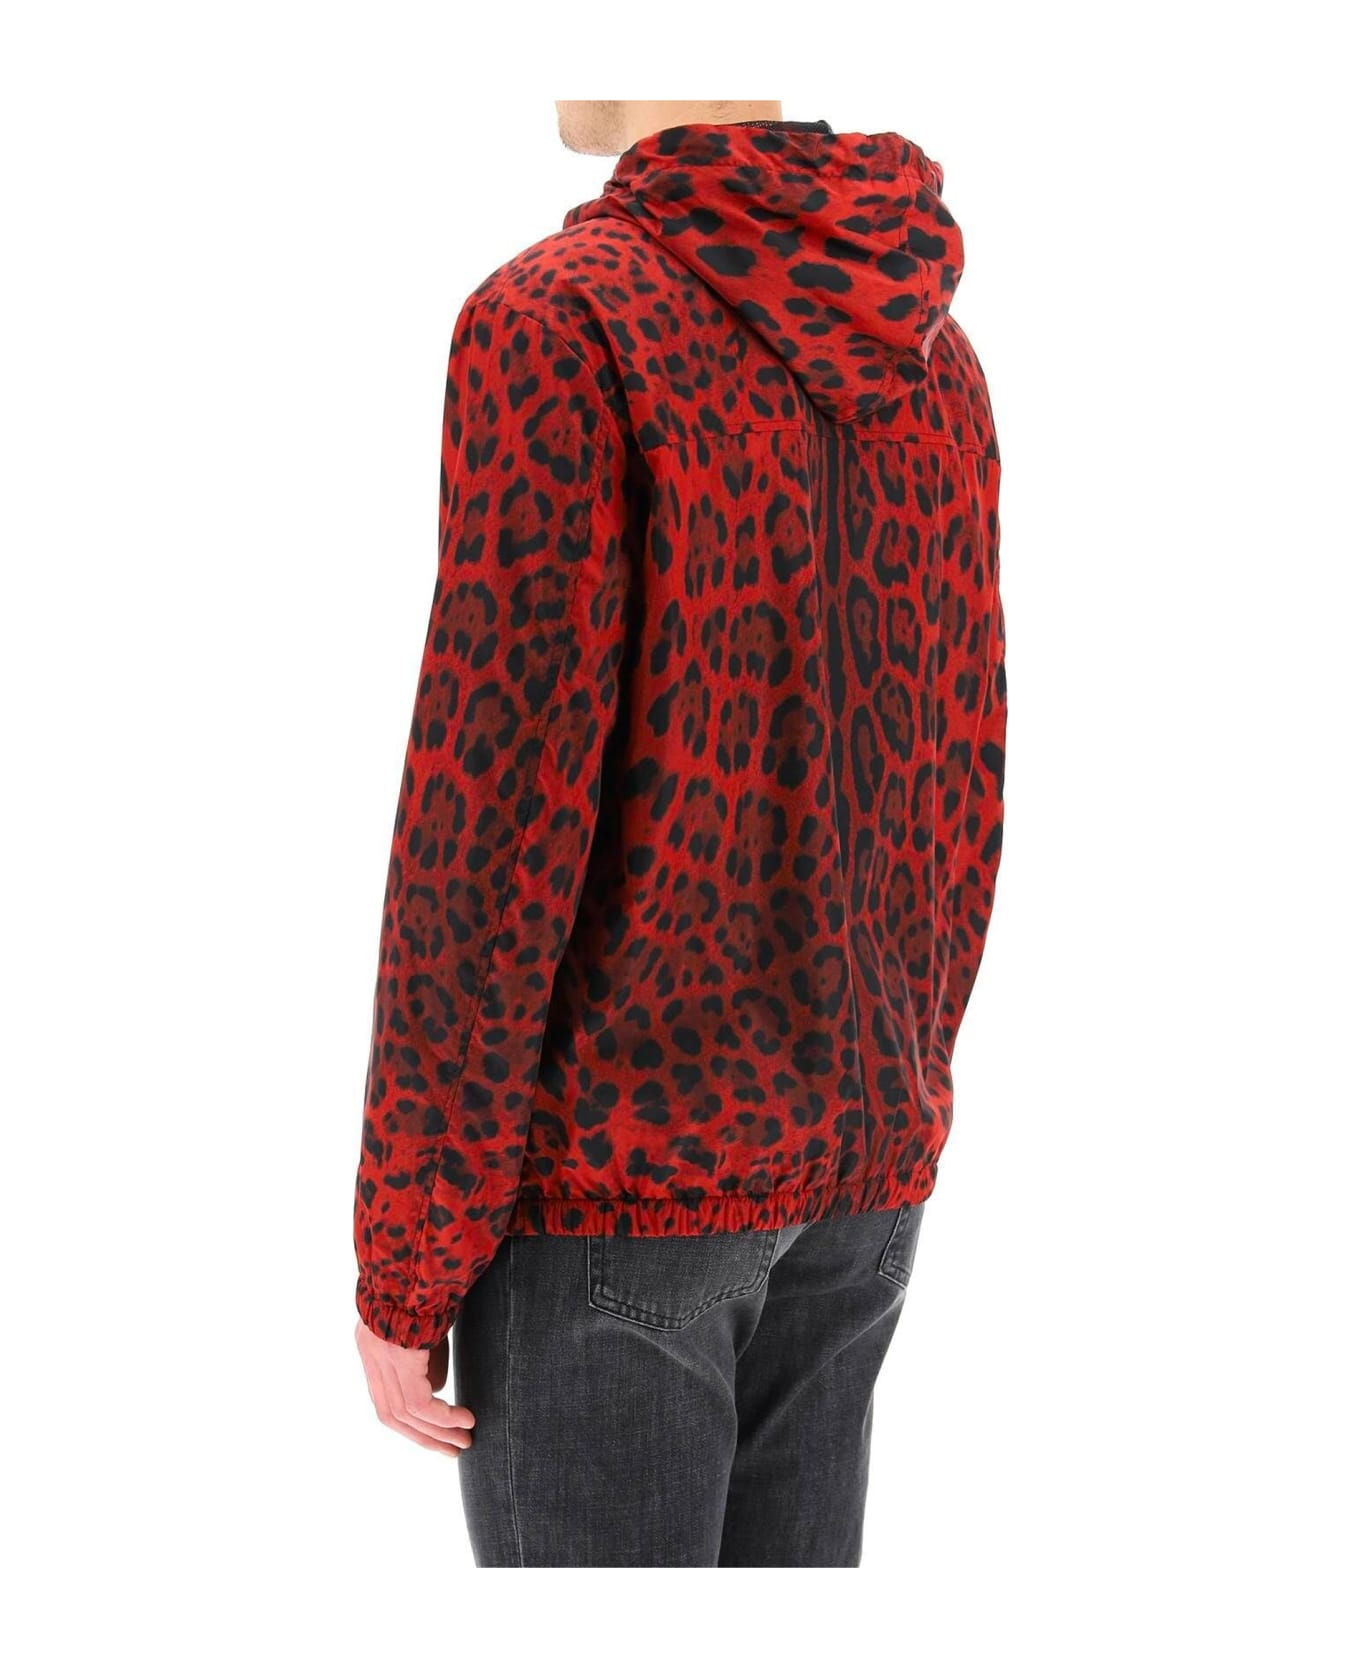 Dolce & Gabbana Jacket With Animal Print - Red